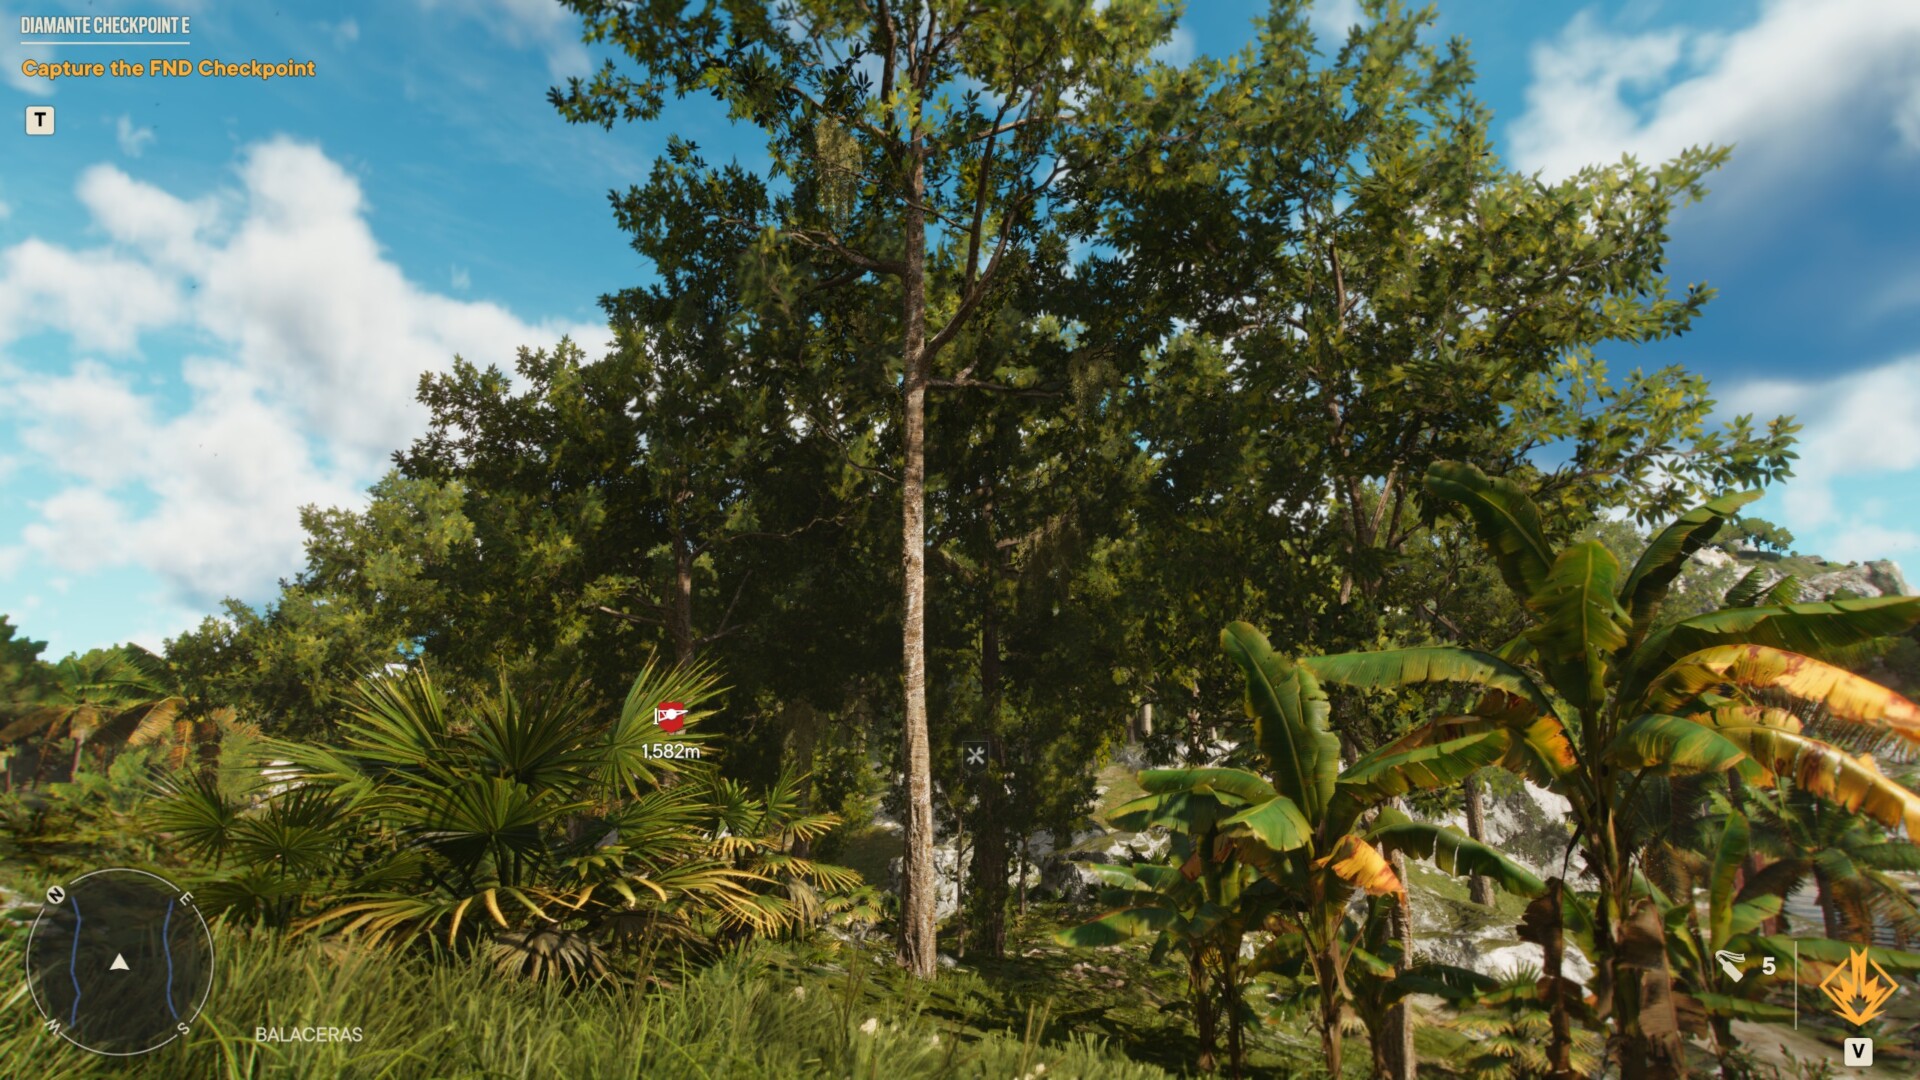 Far Cry 6 tech review: it looks good and runs well - but needs extra polish